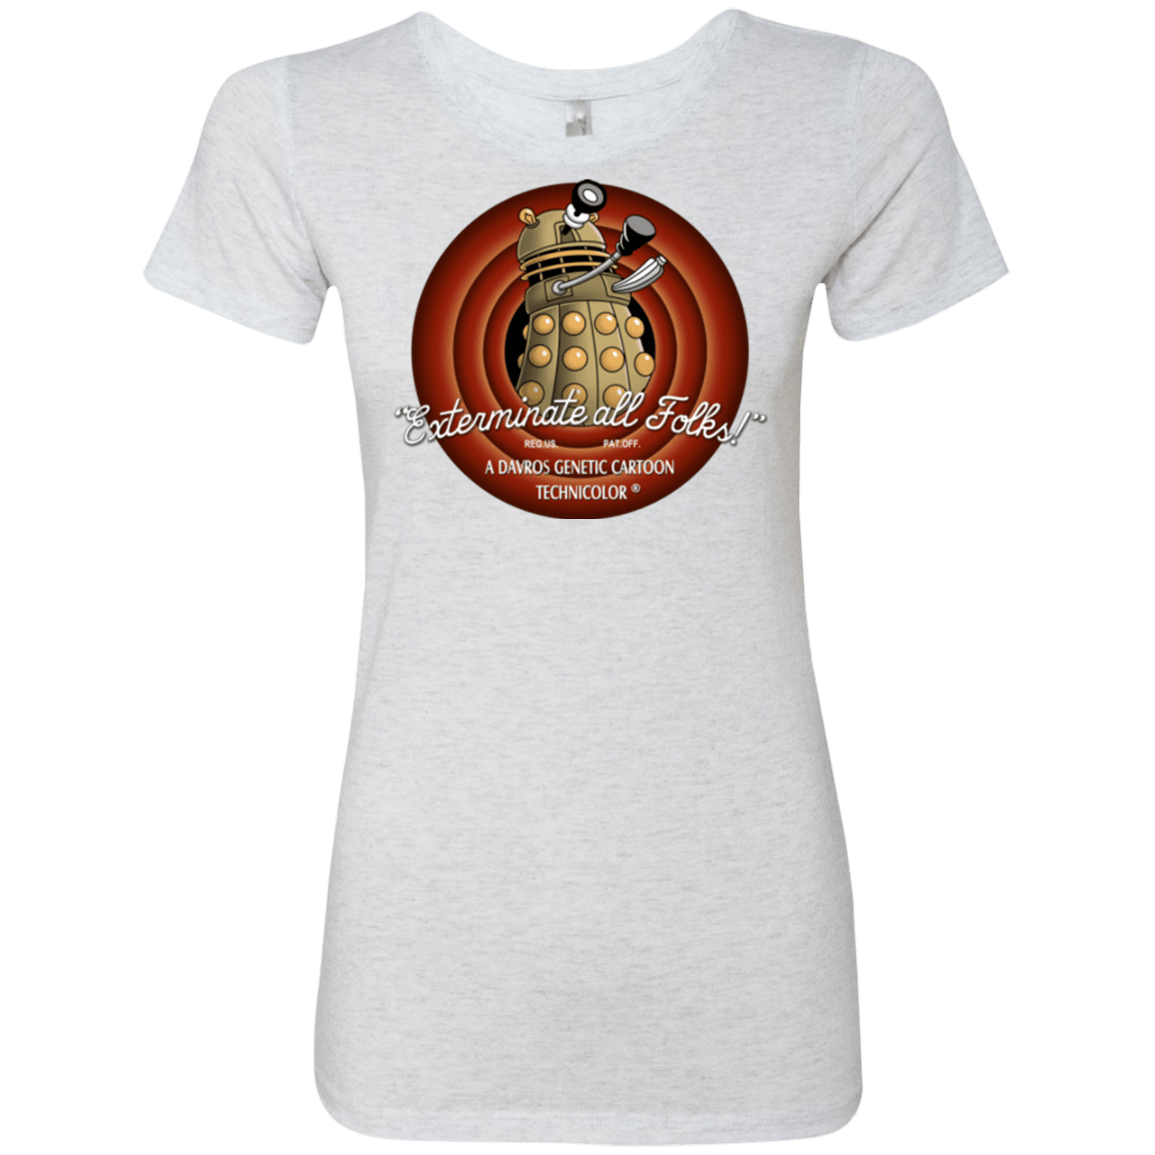 T-Shirts Heather White / Small Exterminate All Folks Women's Triblend T-Shirt